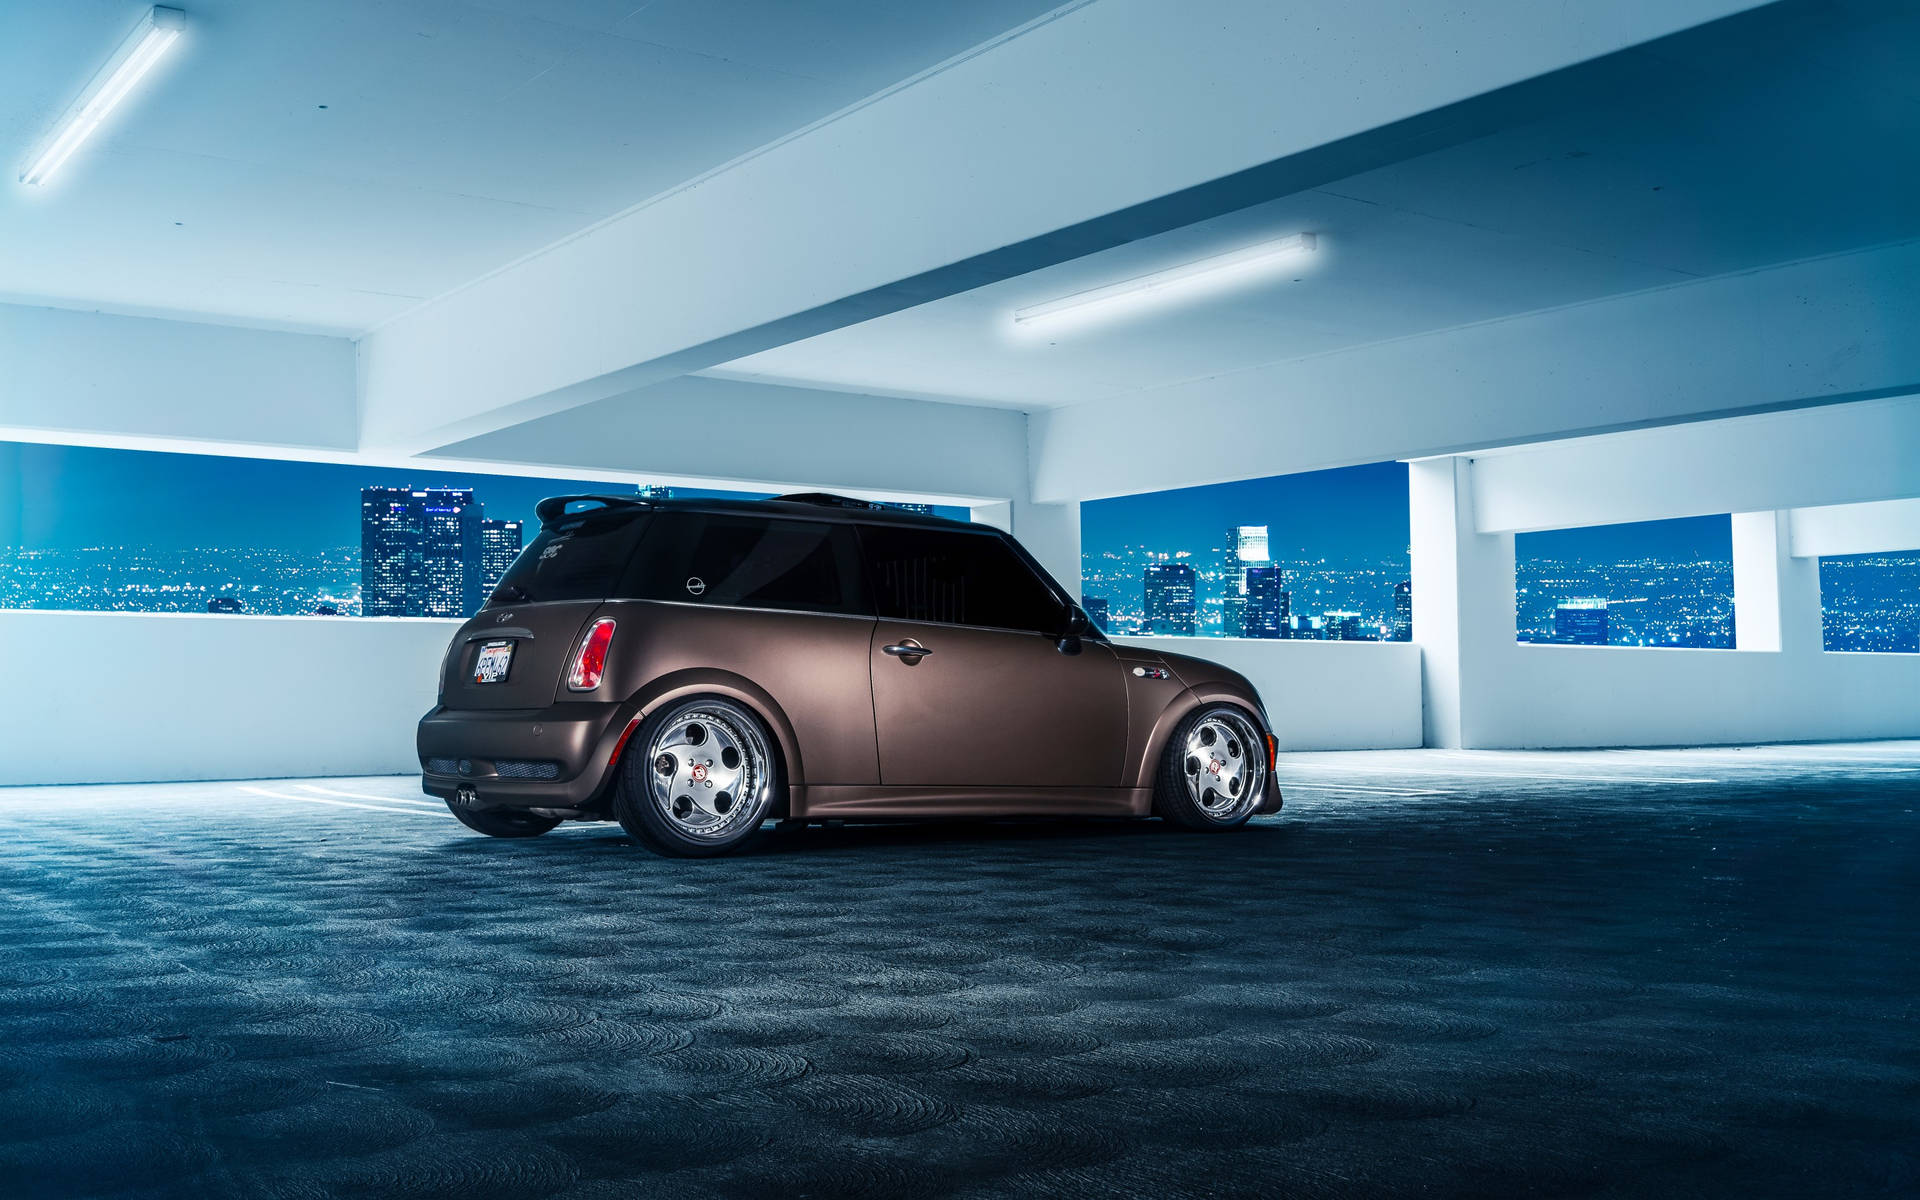 Mini Cooper In Elevated Parking Space Background